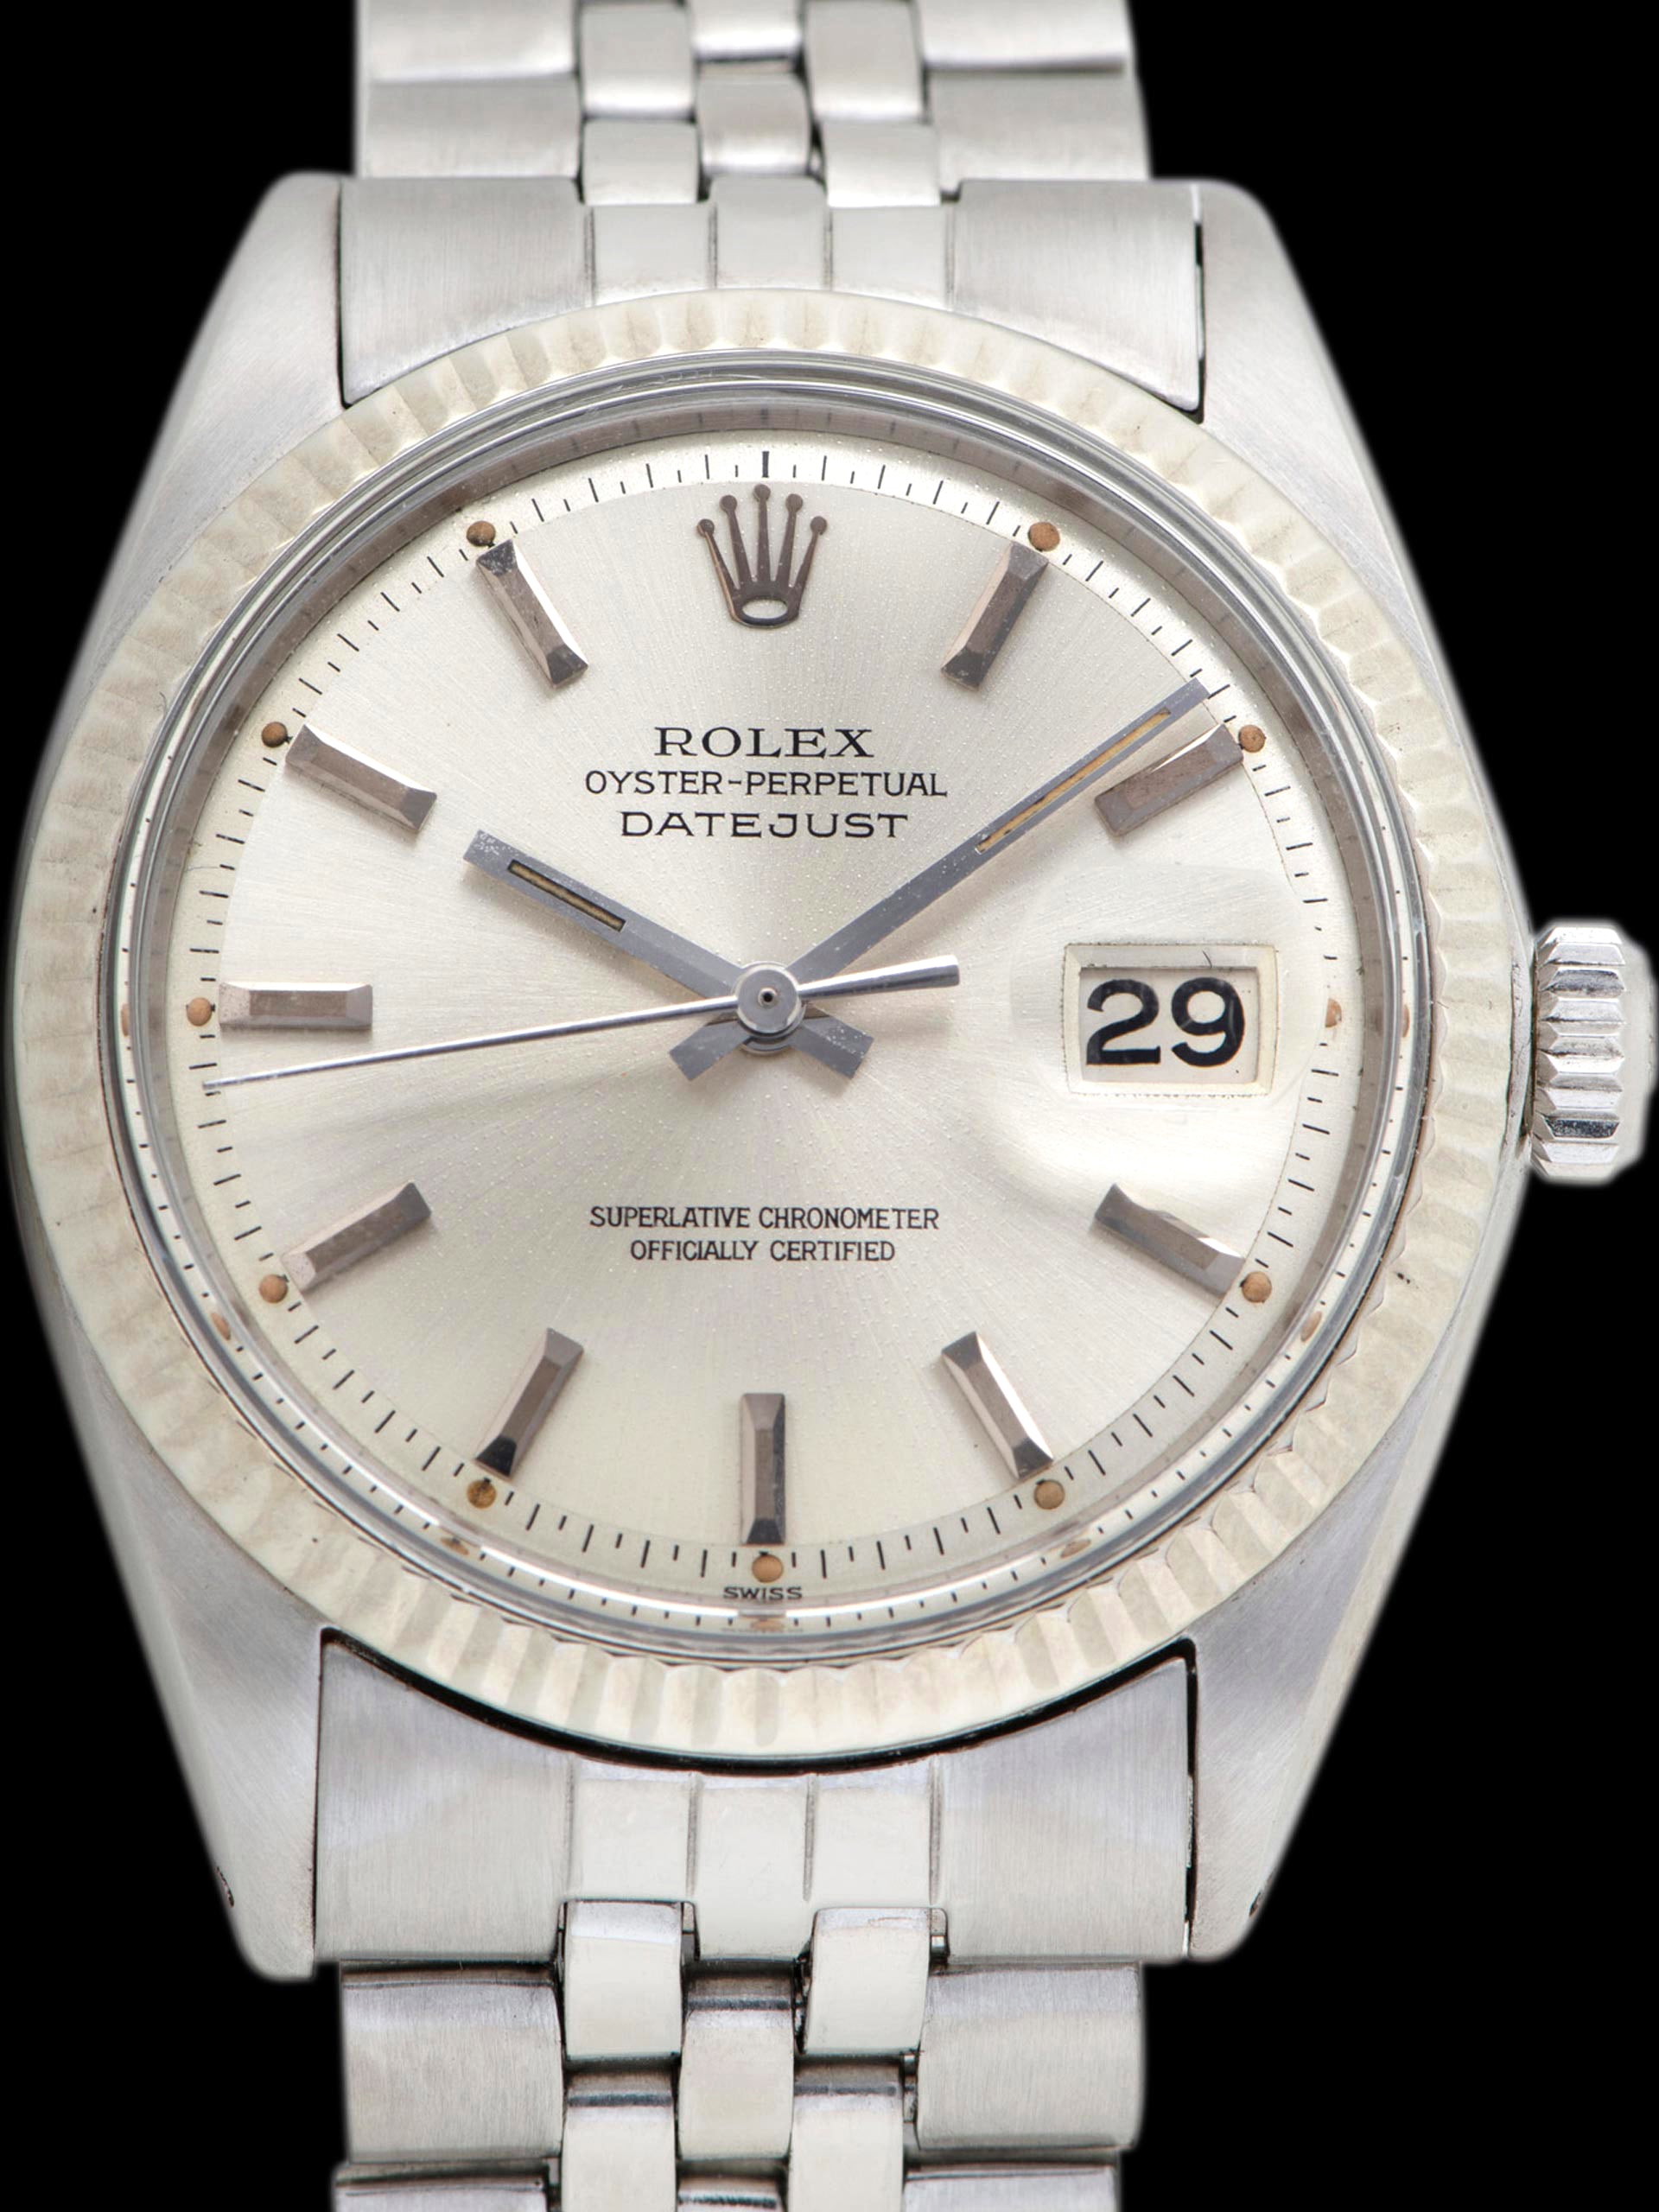 1964 Rolex Datejust (Ref. 1601) Silver "SWISS" Only Dial